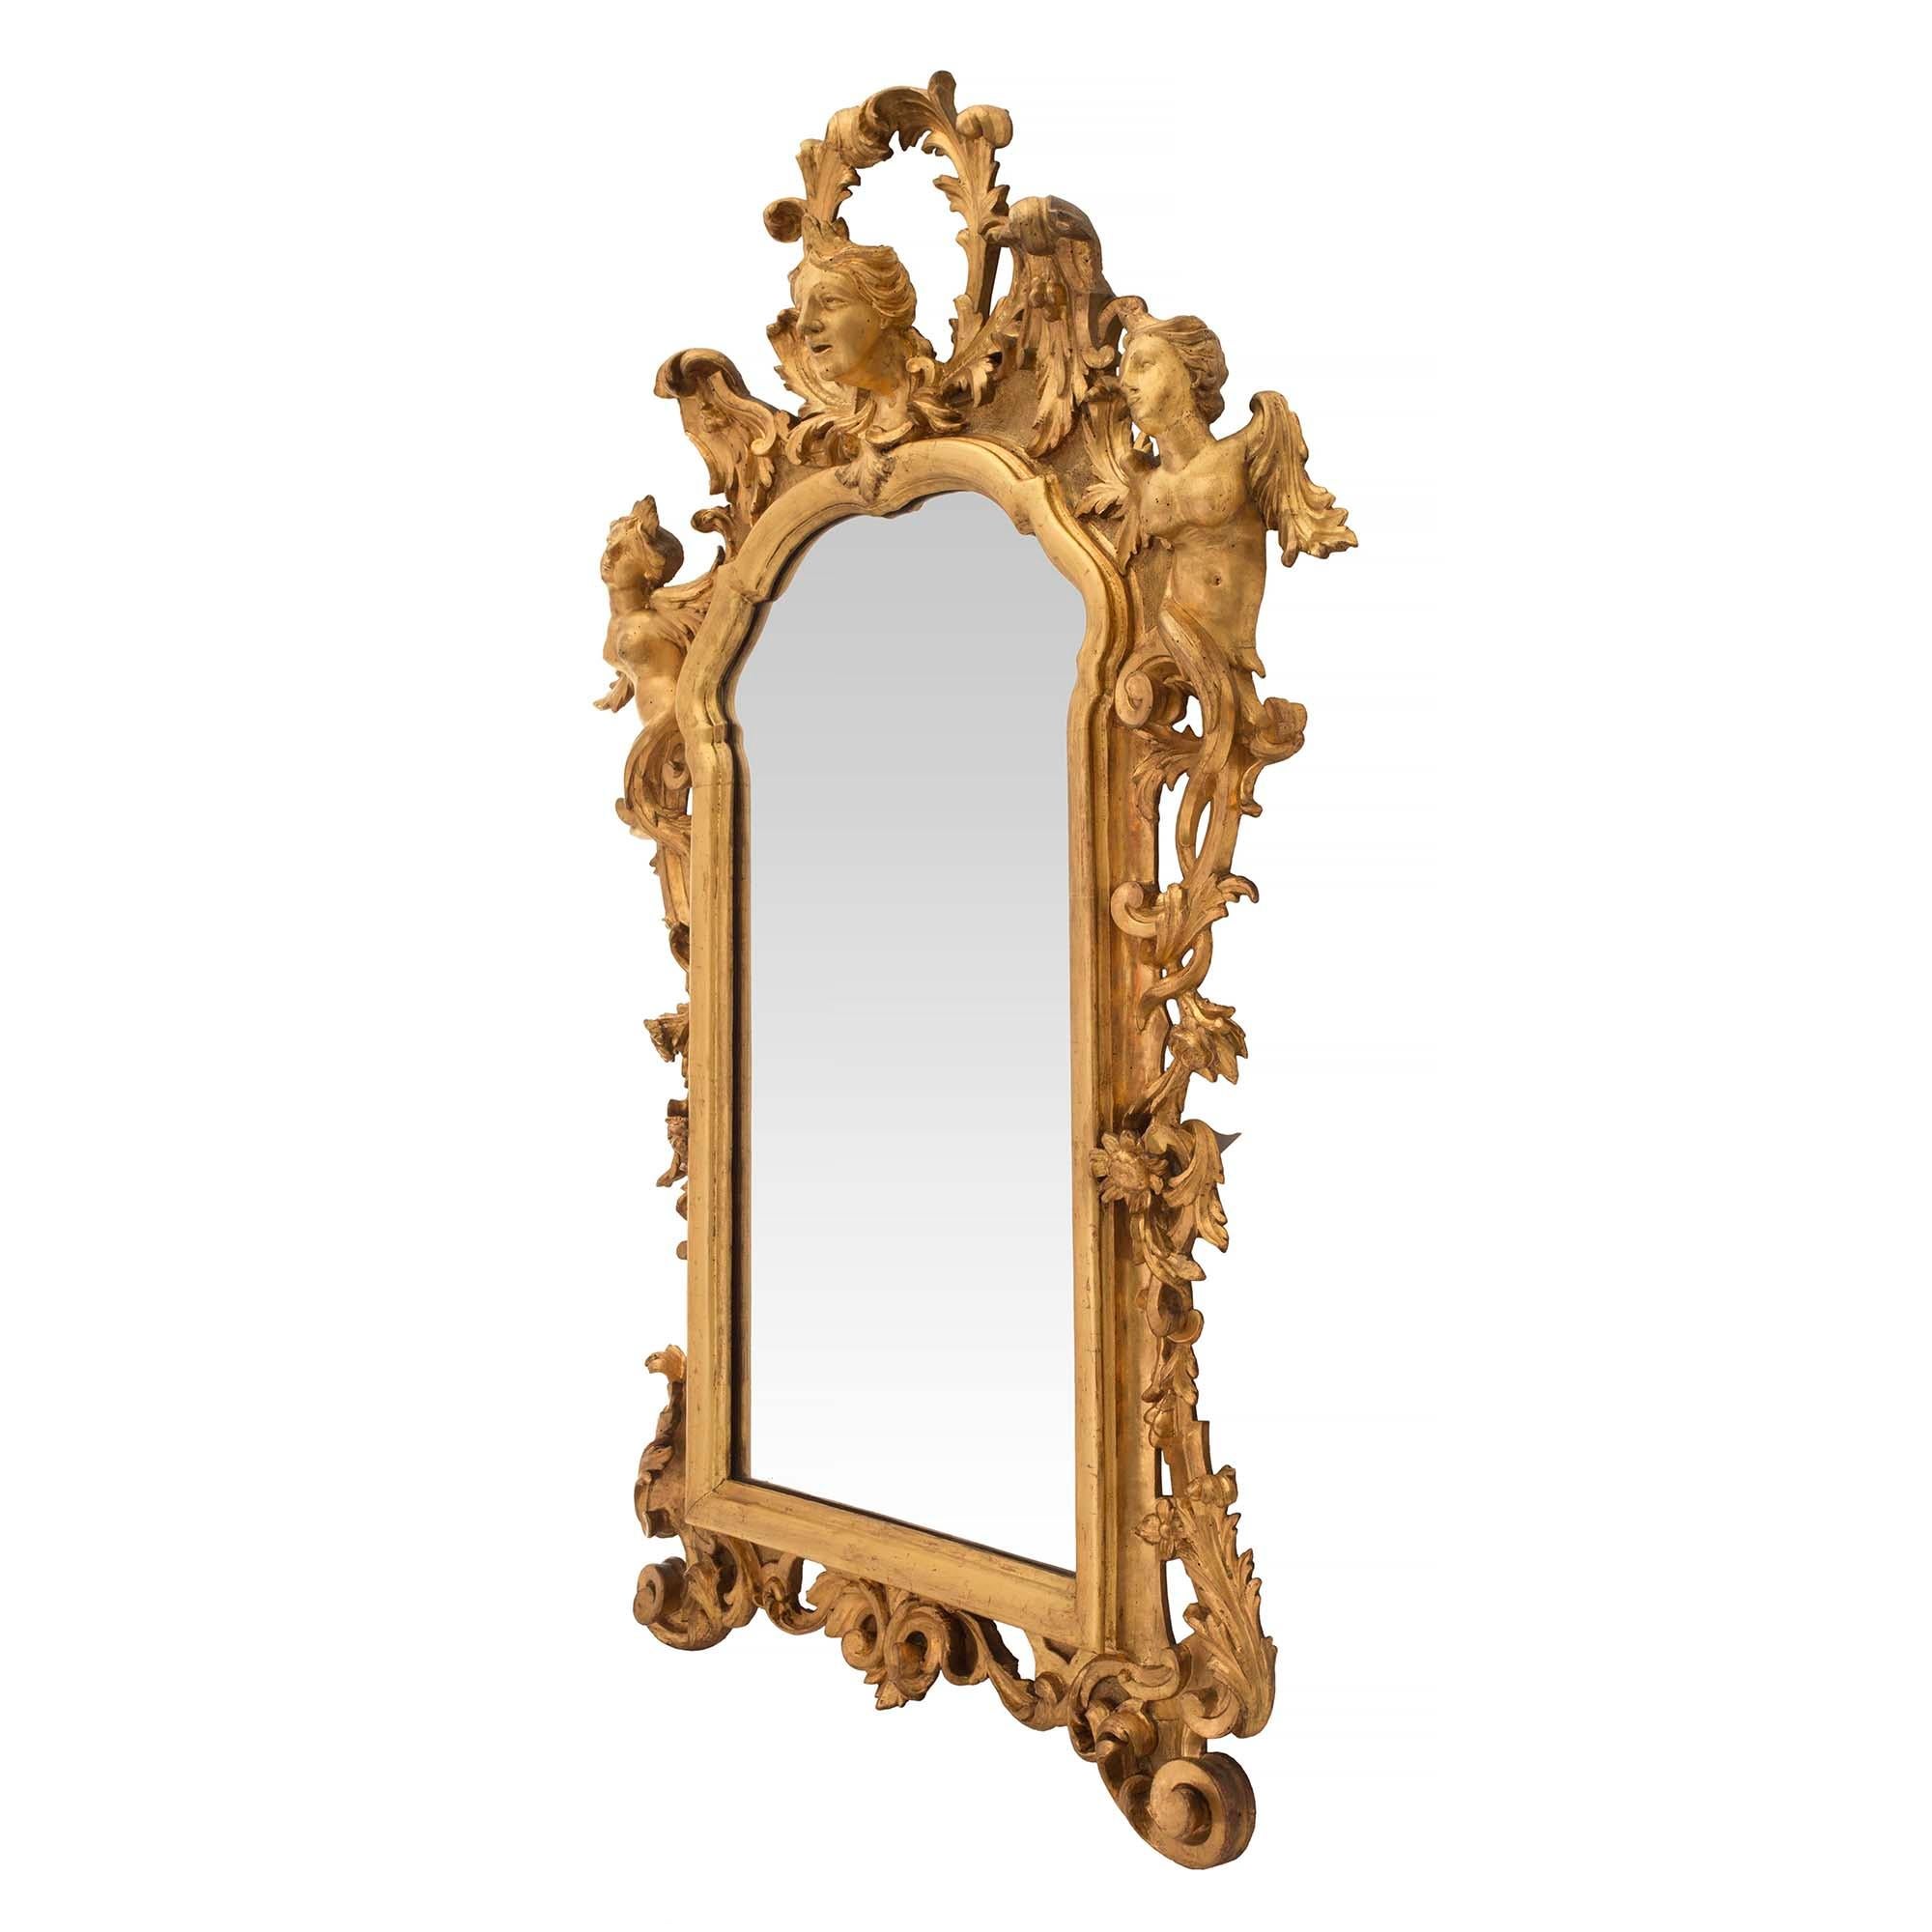 An outstanding Italian 18th century Baroque style giltwood mirror. The mirror is raised by scrolled feet with large acanthus leaves and floral carvings centering the scrolled bottom reserve. Leading up each side are rich carvings of flowers and